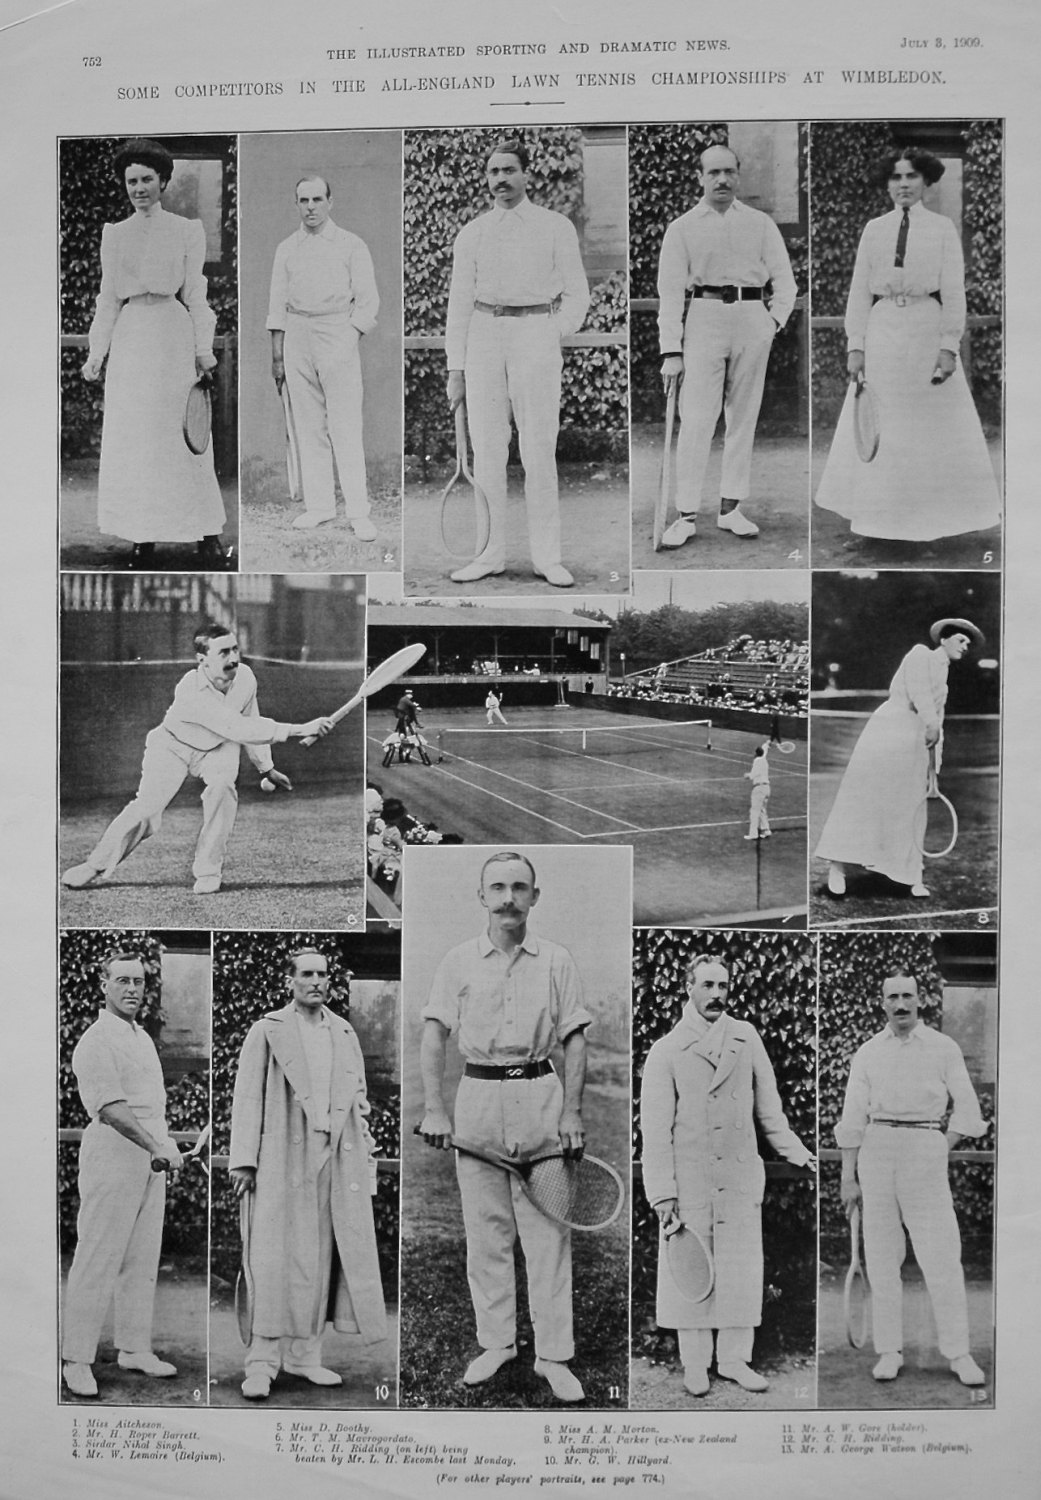 Some Competitors in the All-England Lawn Tennis Championships at Wimbledon.